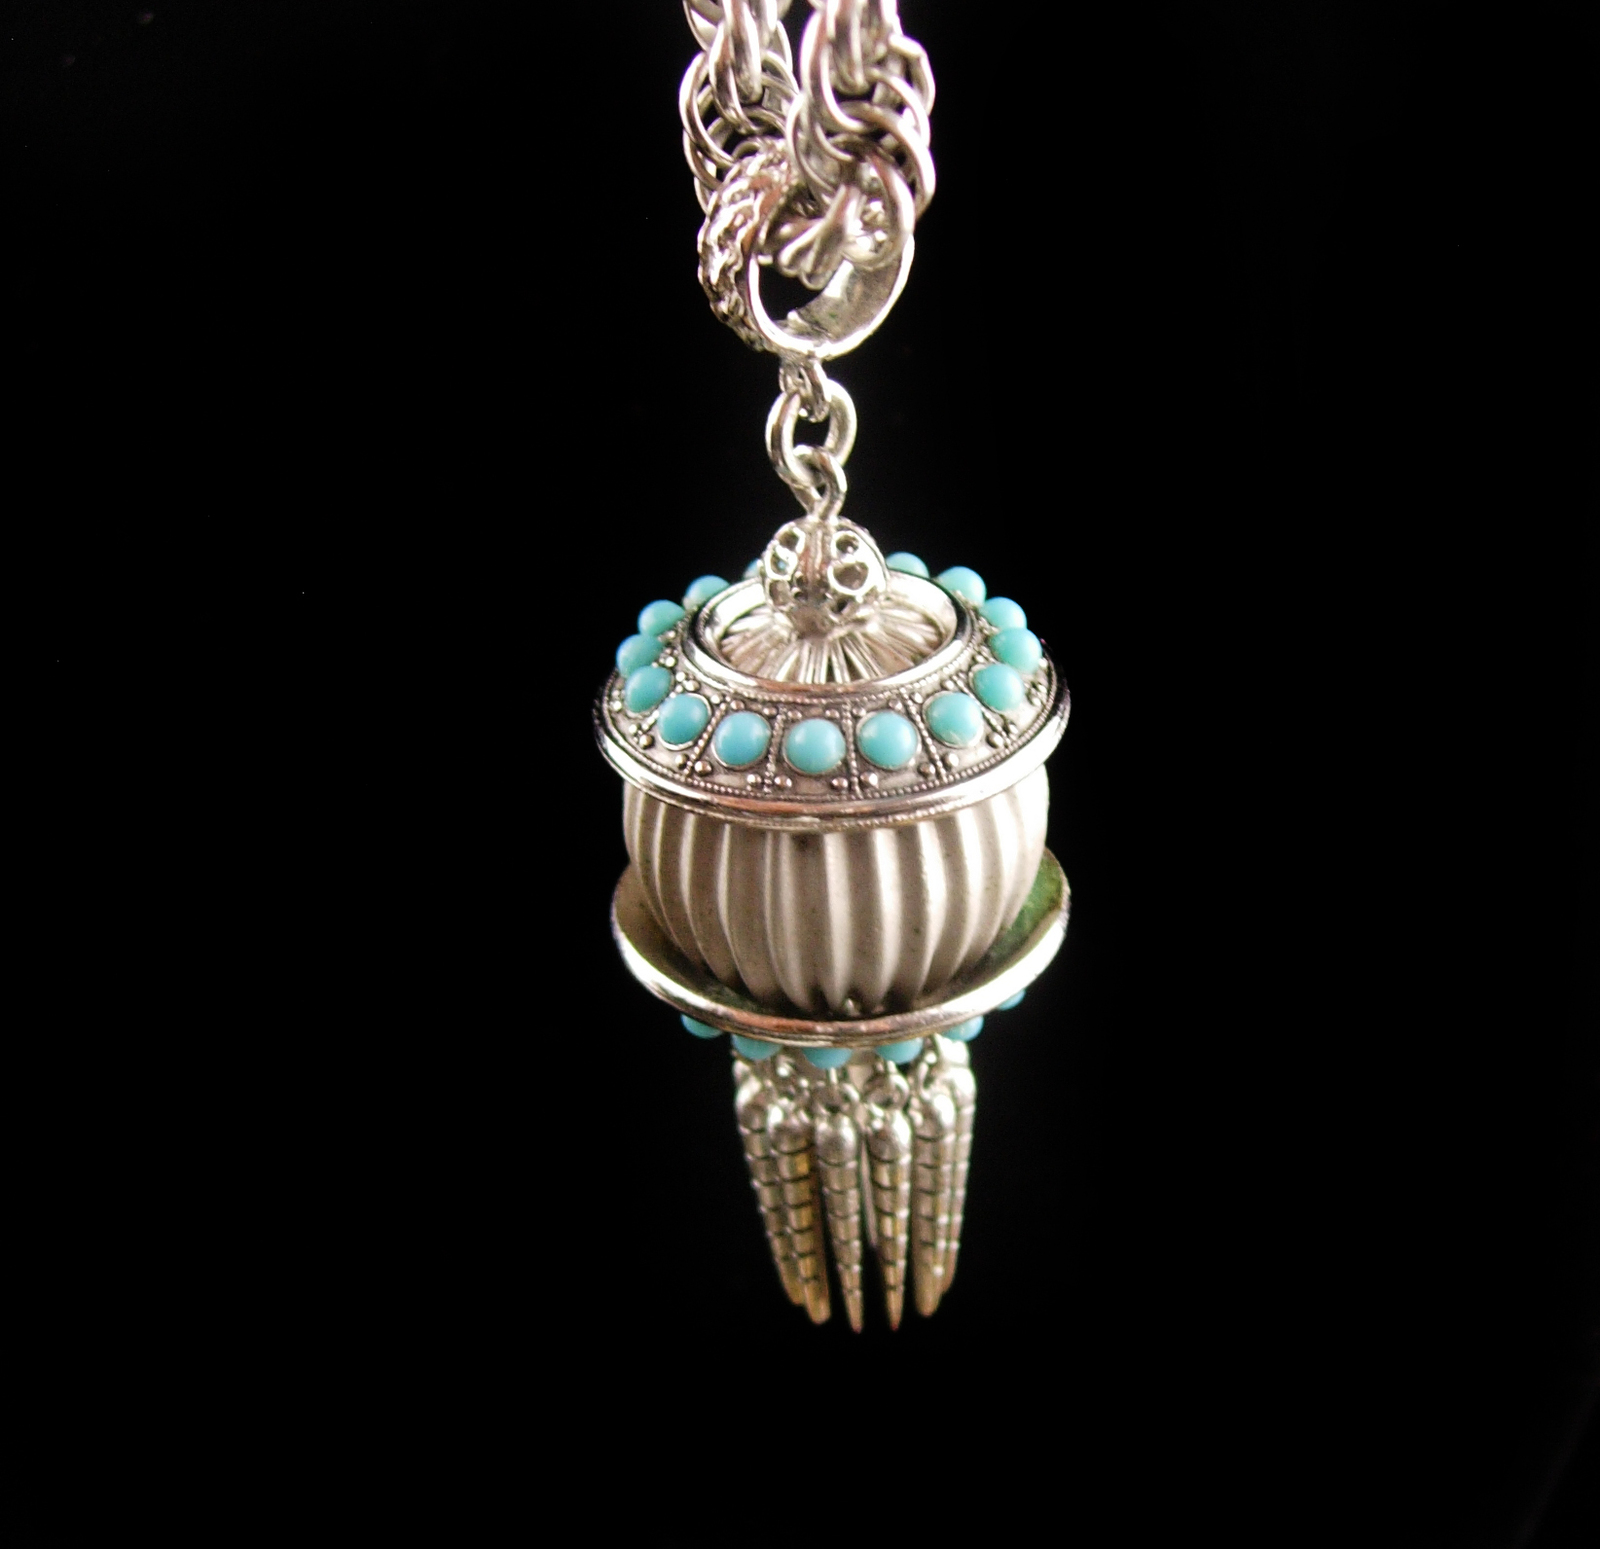 Primary image for Exotic Tassel Necklace - turquoise tassel glass dangle drop - bellydance Gypsy n